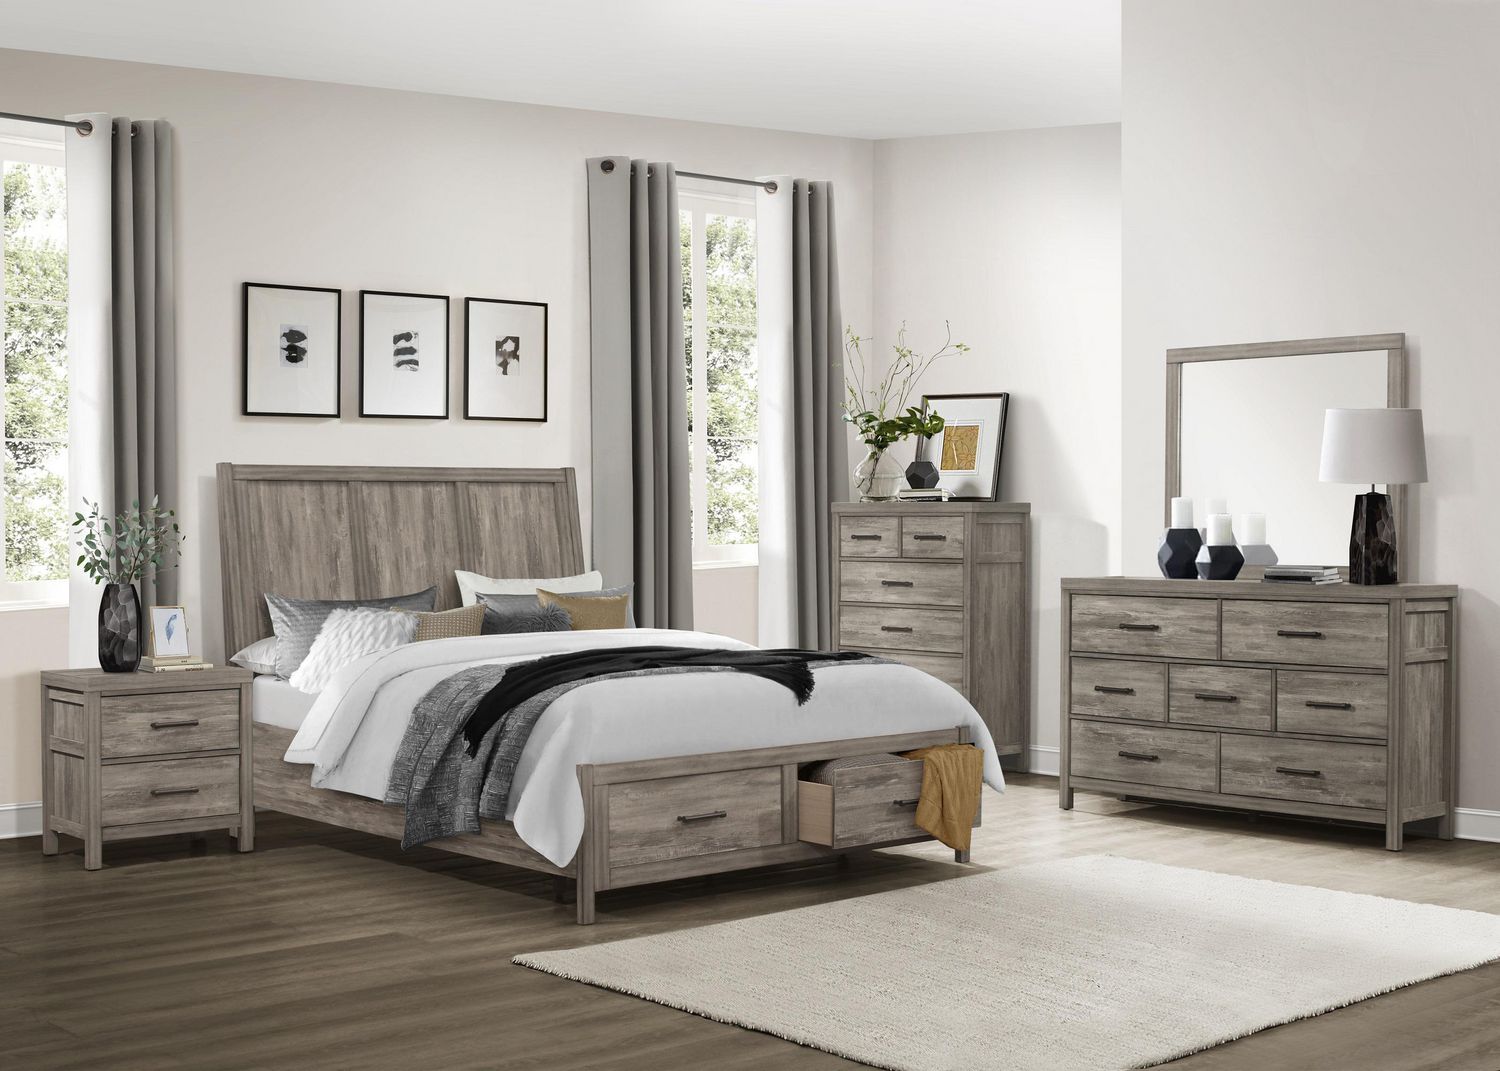 bedroom furniture canada free shipping